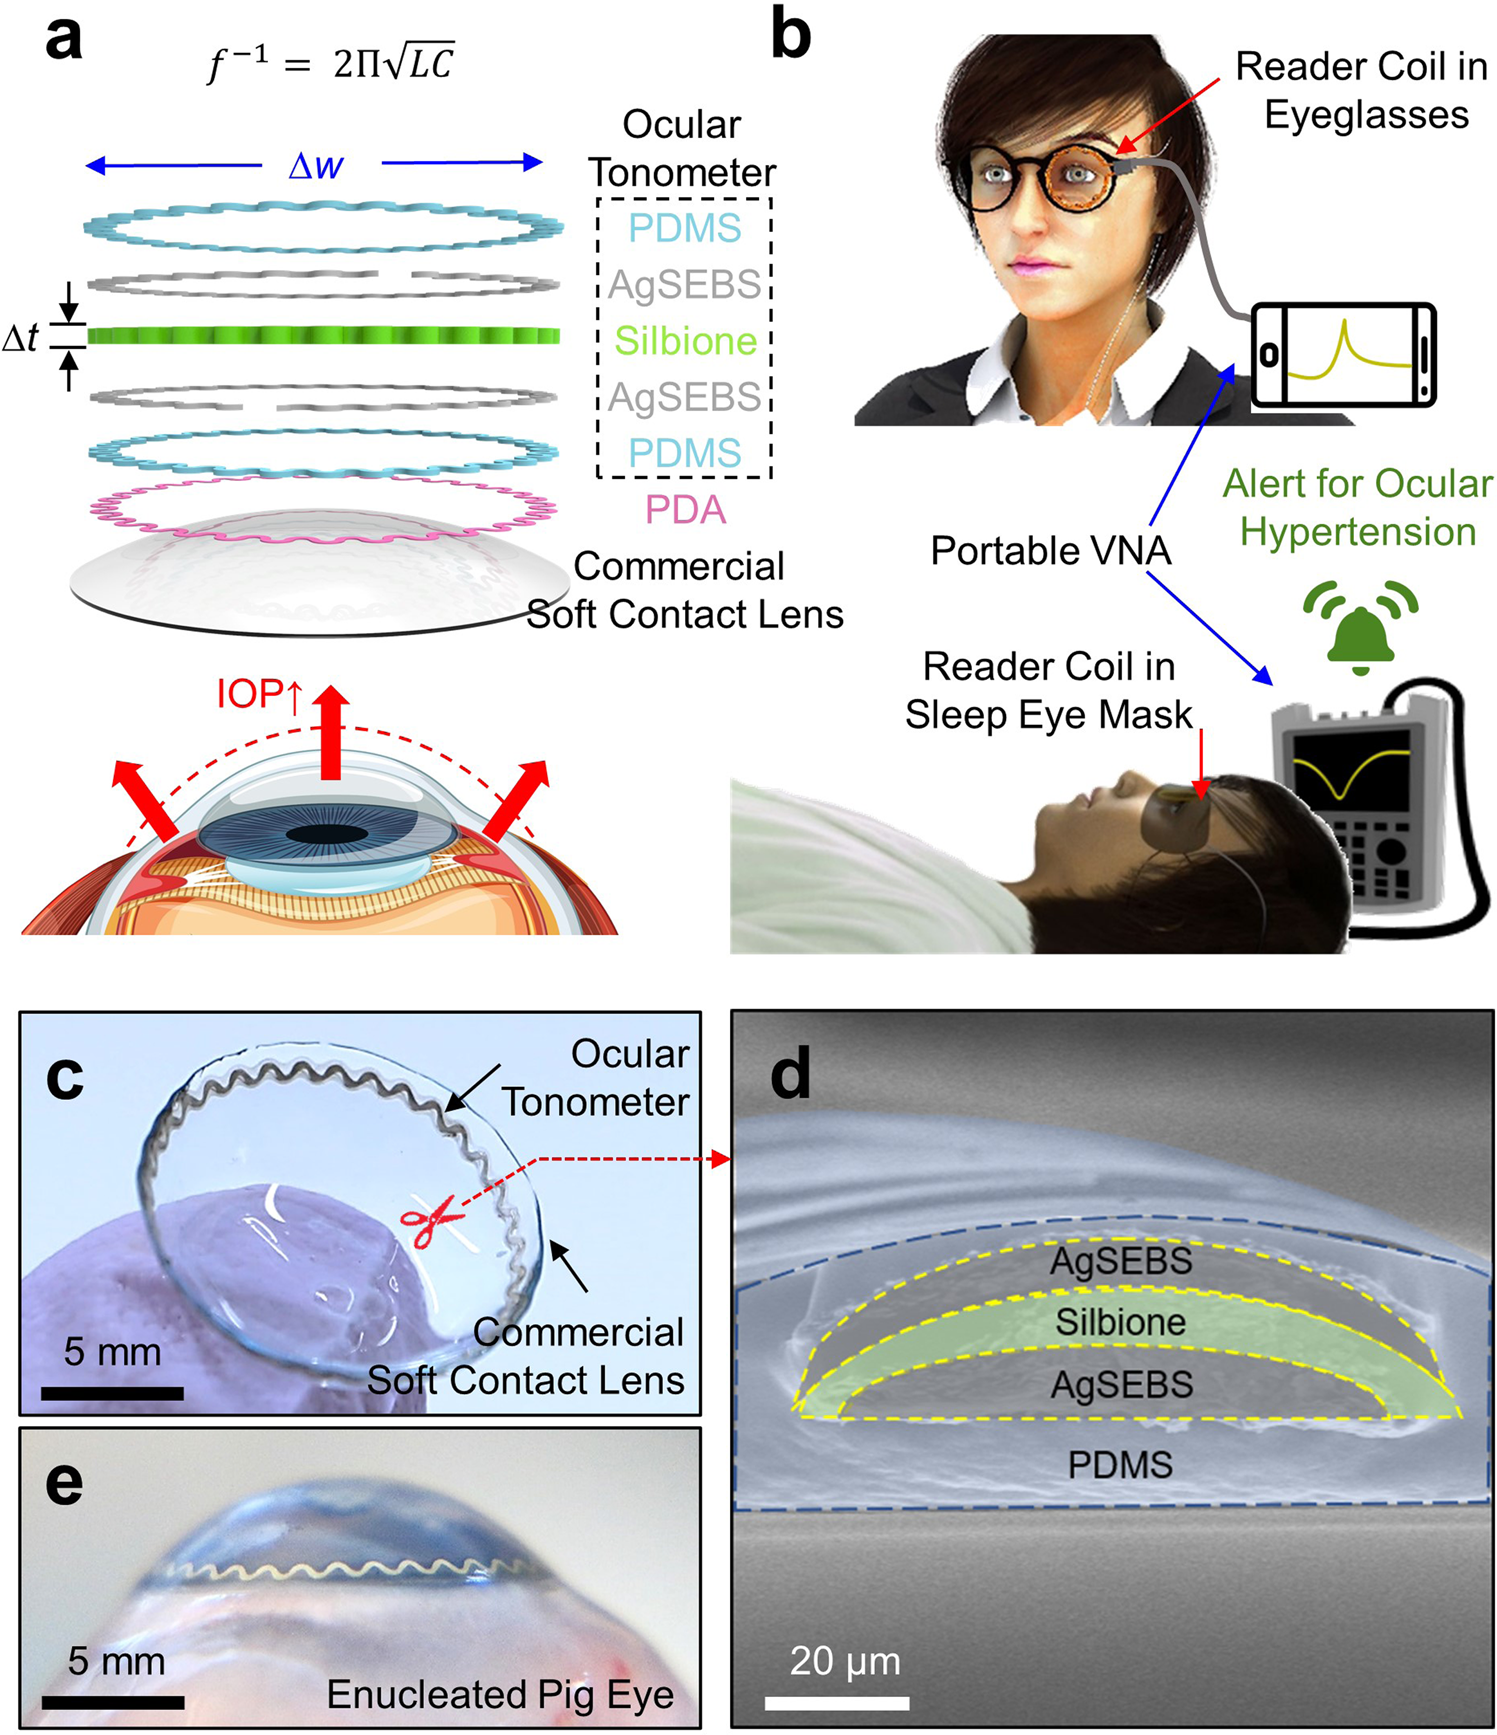 syndroom segment vis Smart soft contact lenses for continuous 24-hour monitoring of intraocular  pressure in glaucoma care | Nature Communications